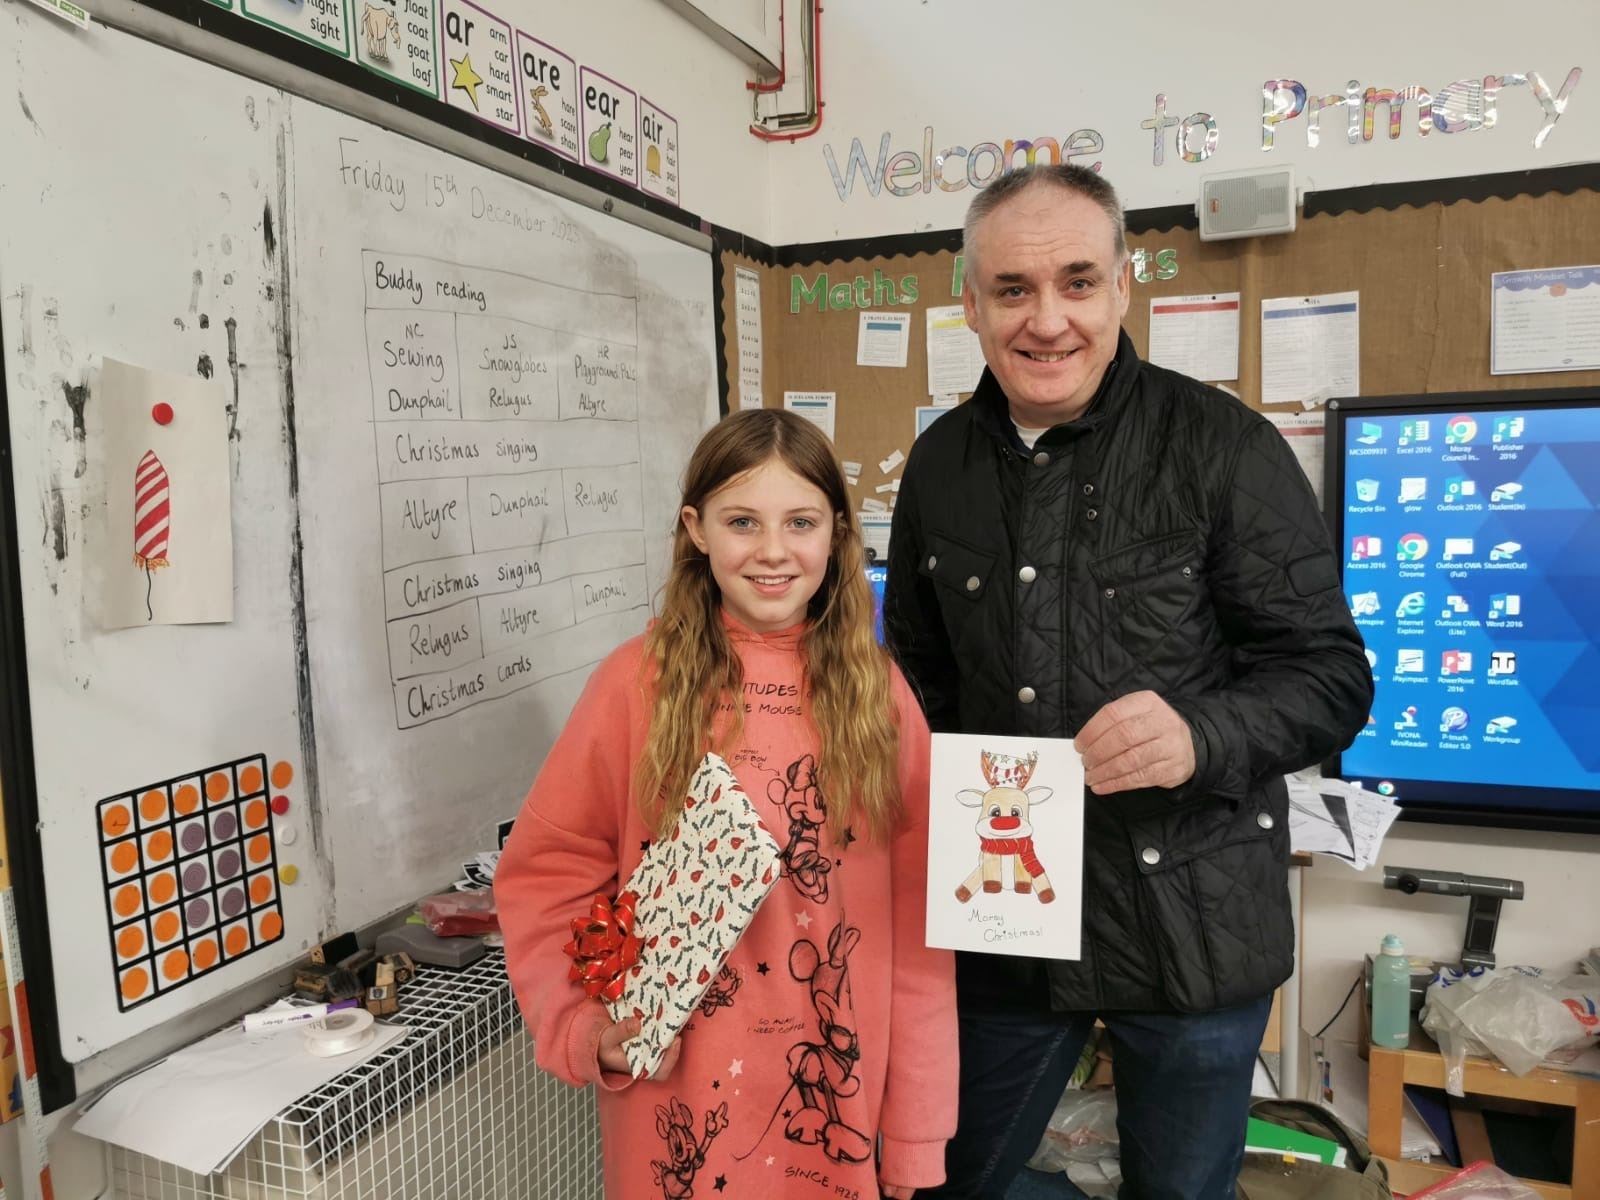 Hannah Clapperton, a P7 pupil from Logie Primary School, was the winner of Richard Lochhead MSP's Christmas card competition.